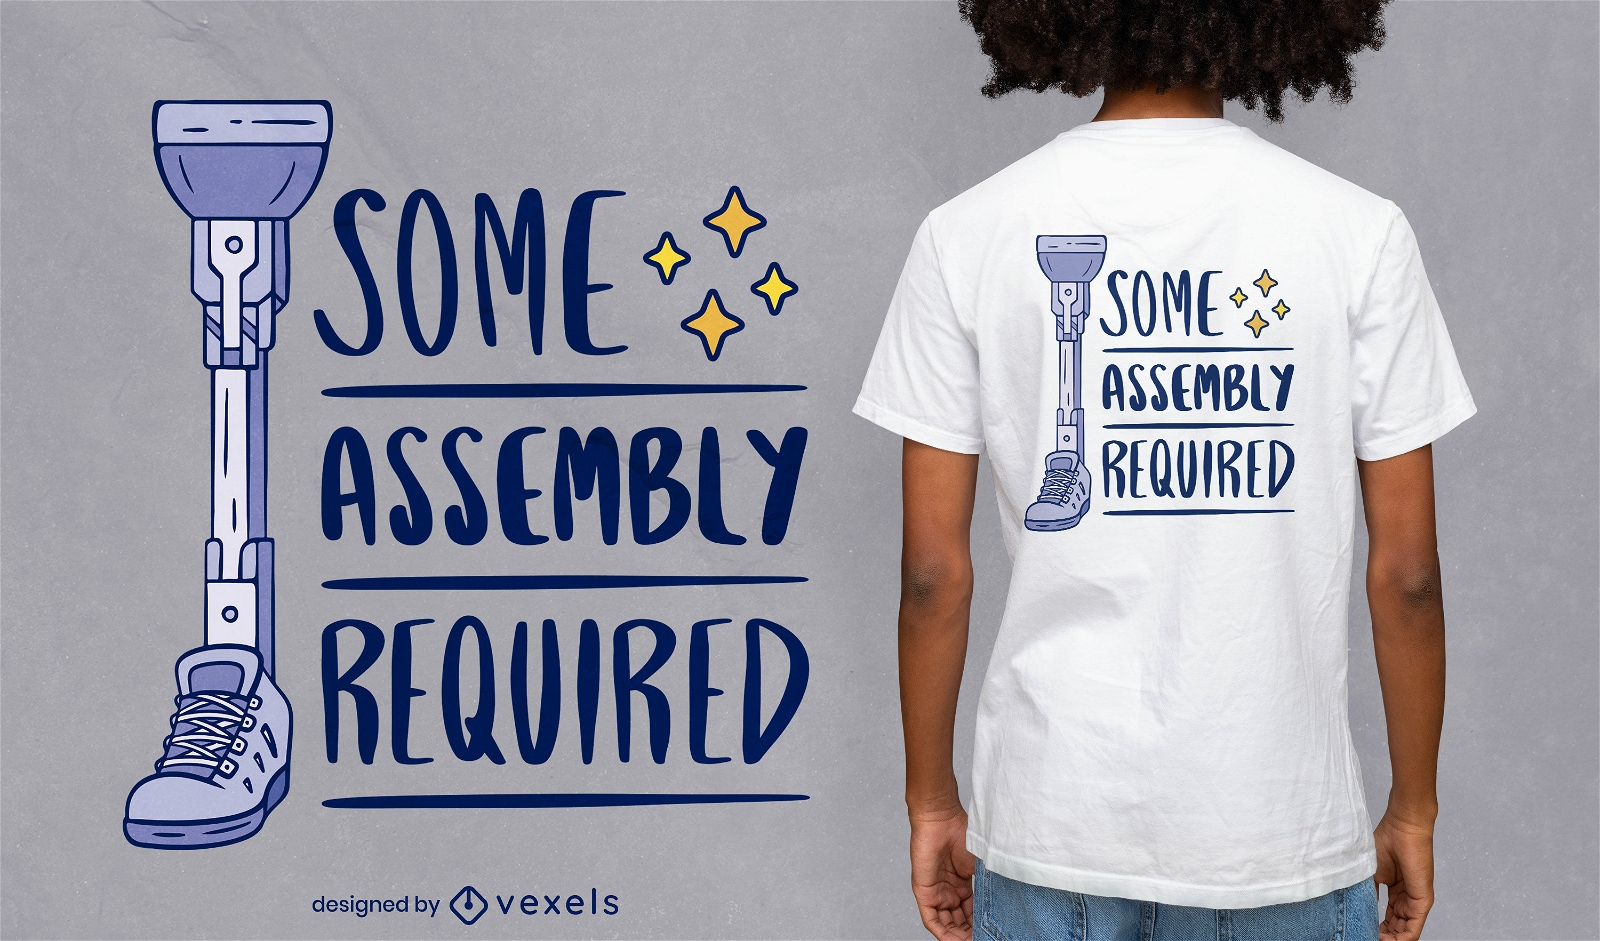 Some assembly required quote t-shirt design